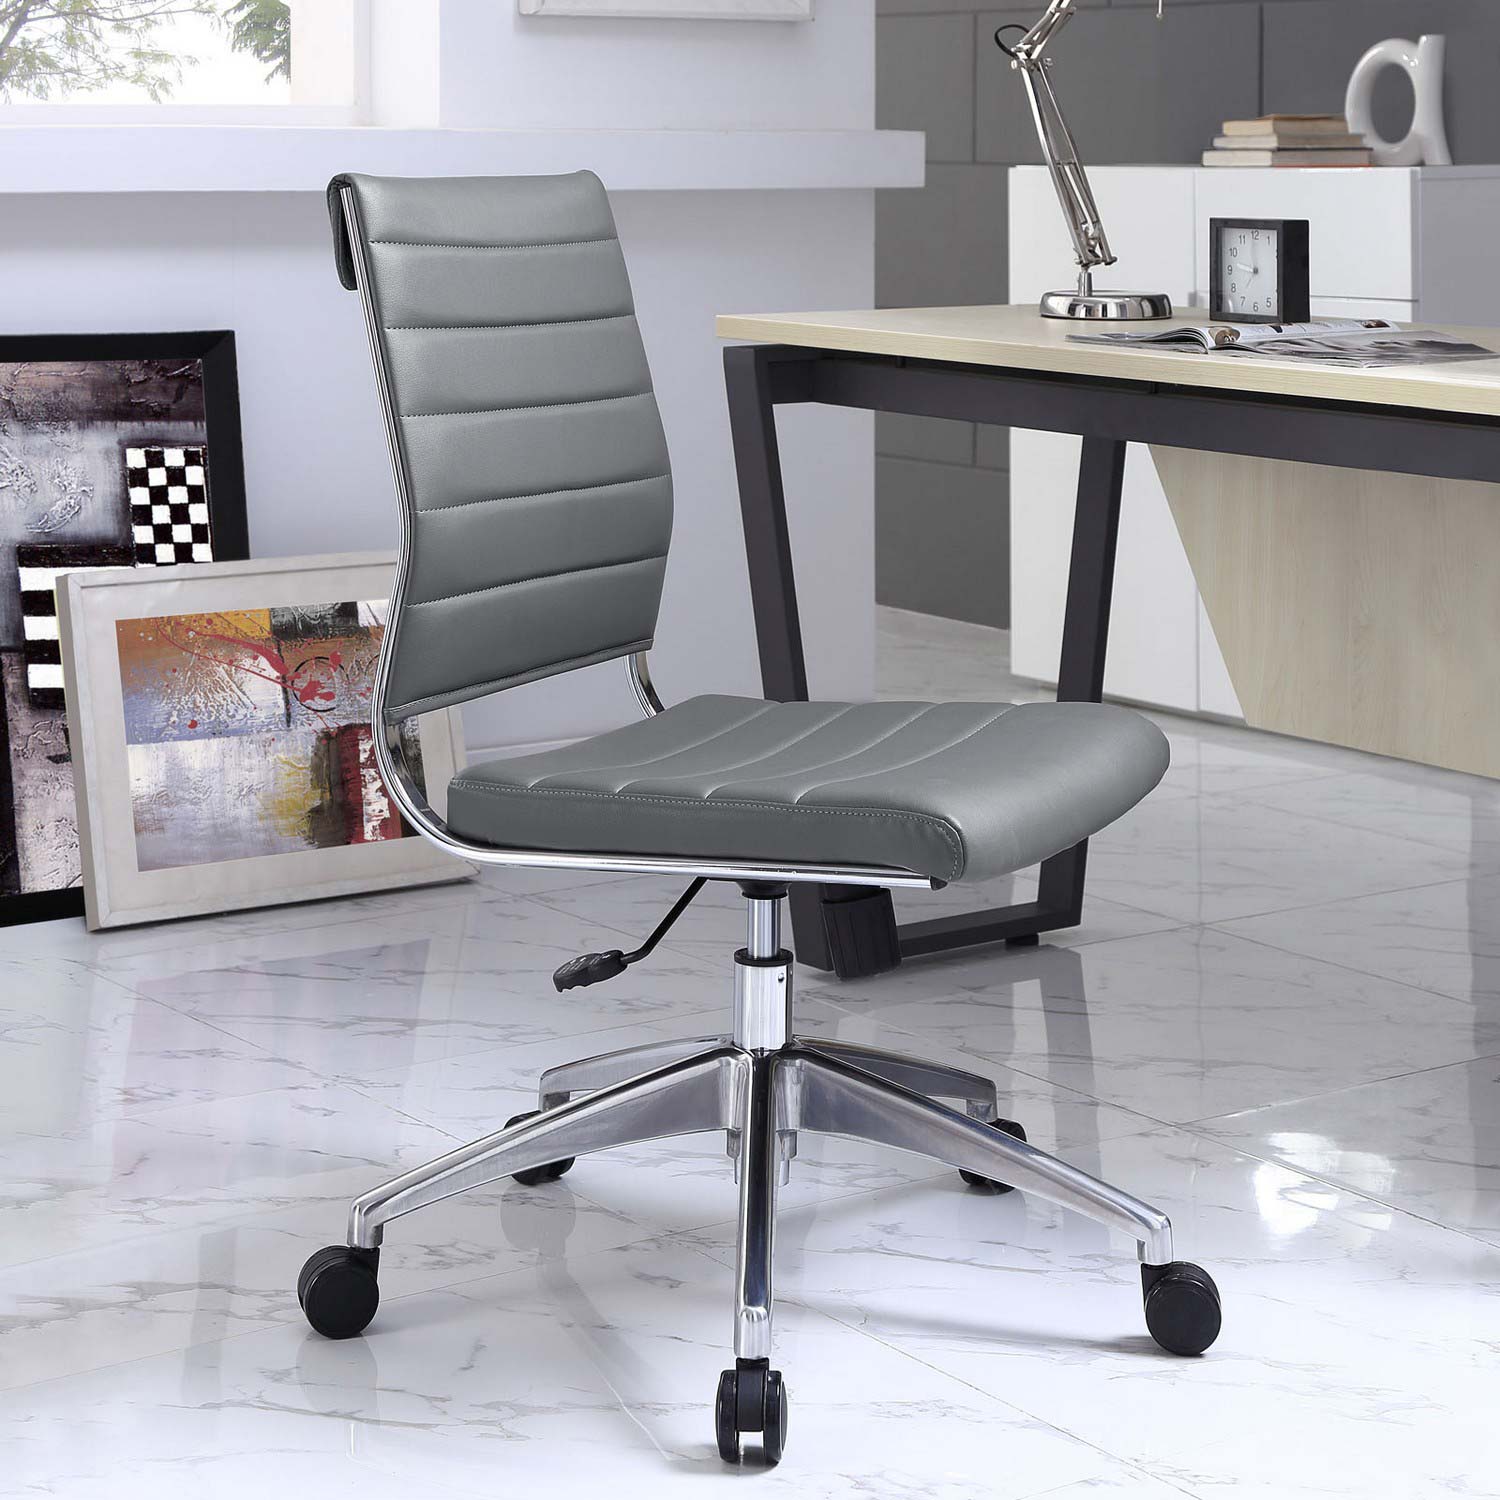 Modway Jive Armless Mid Back Office Chair - Gray